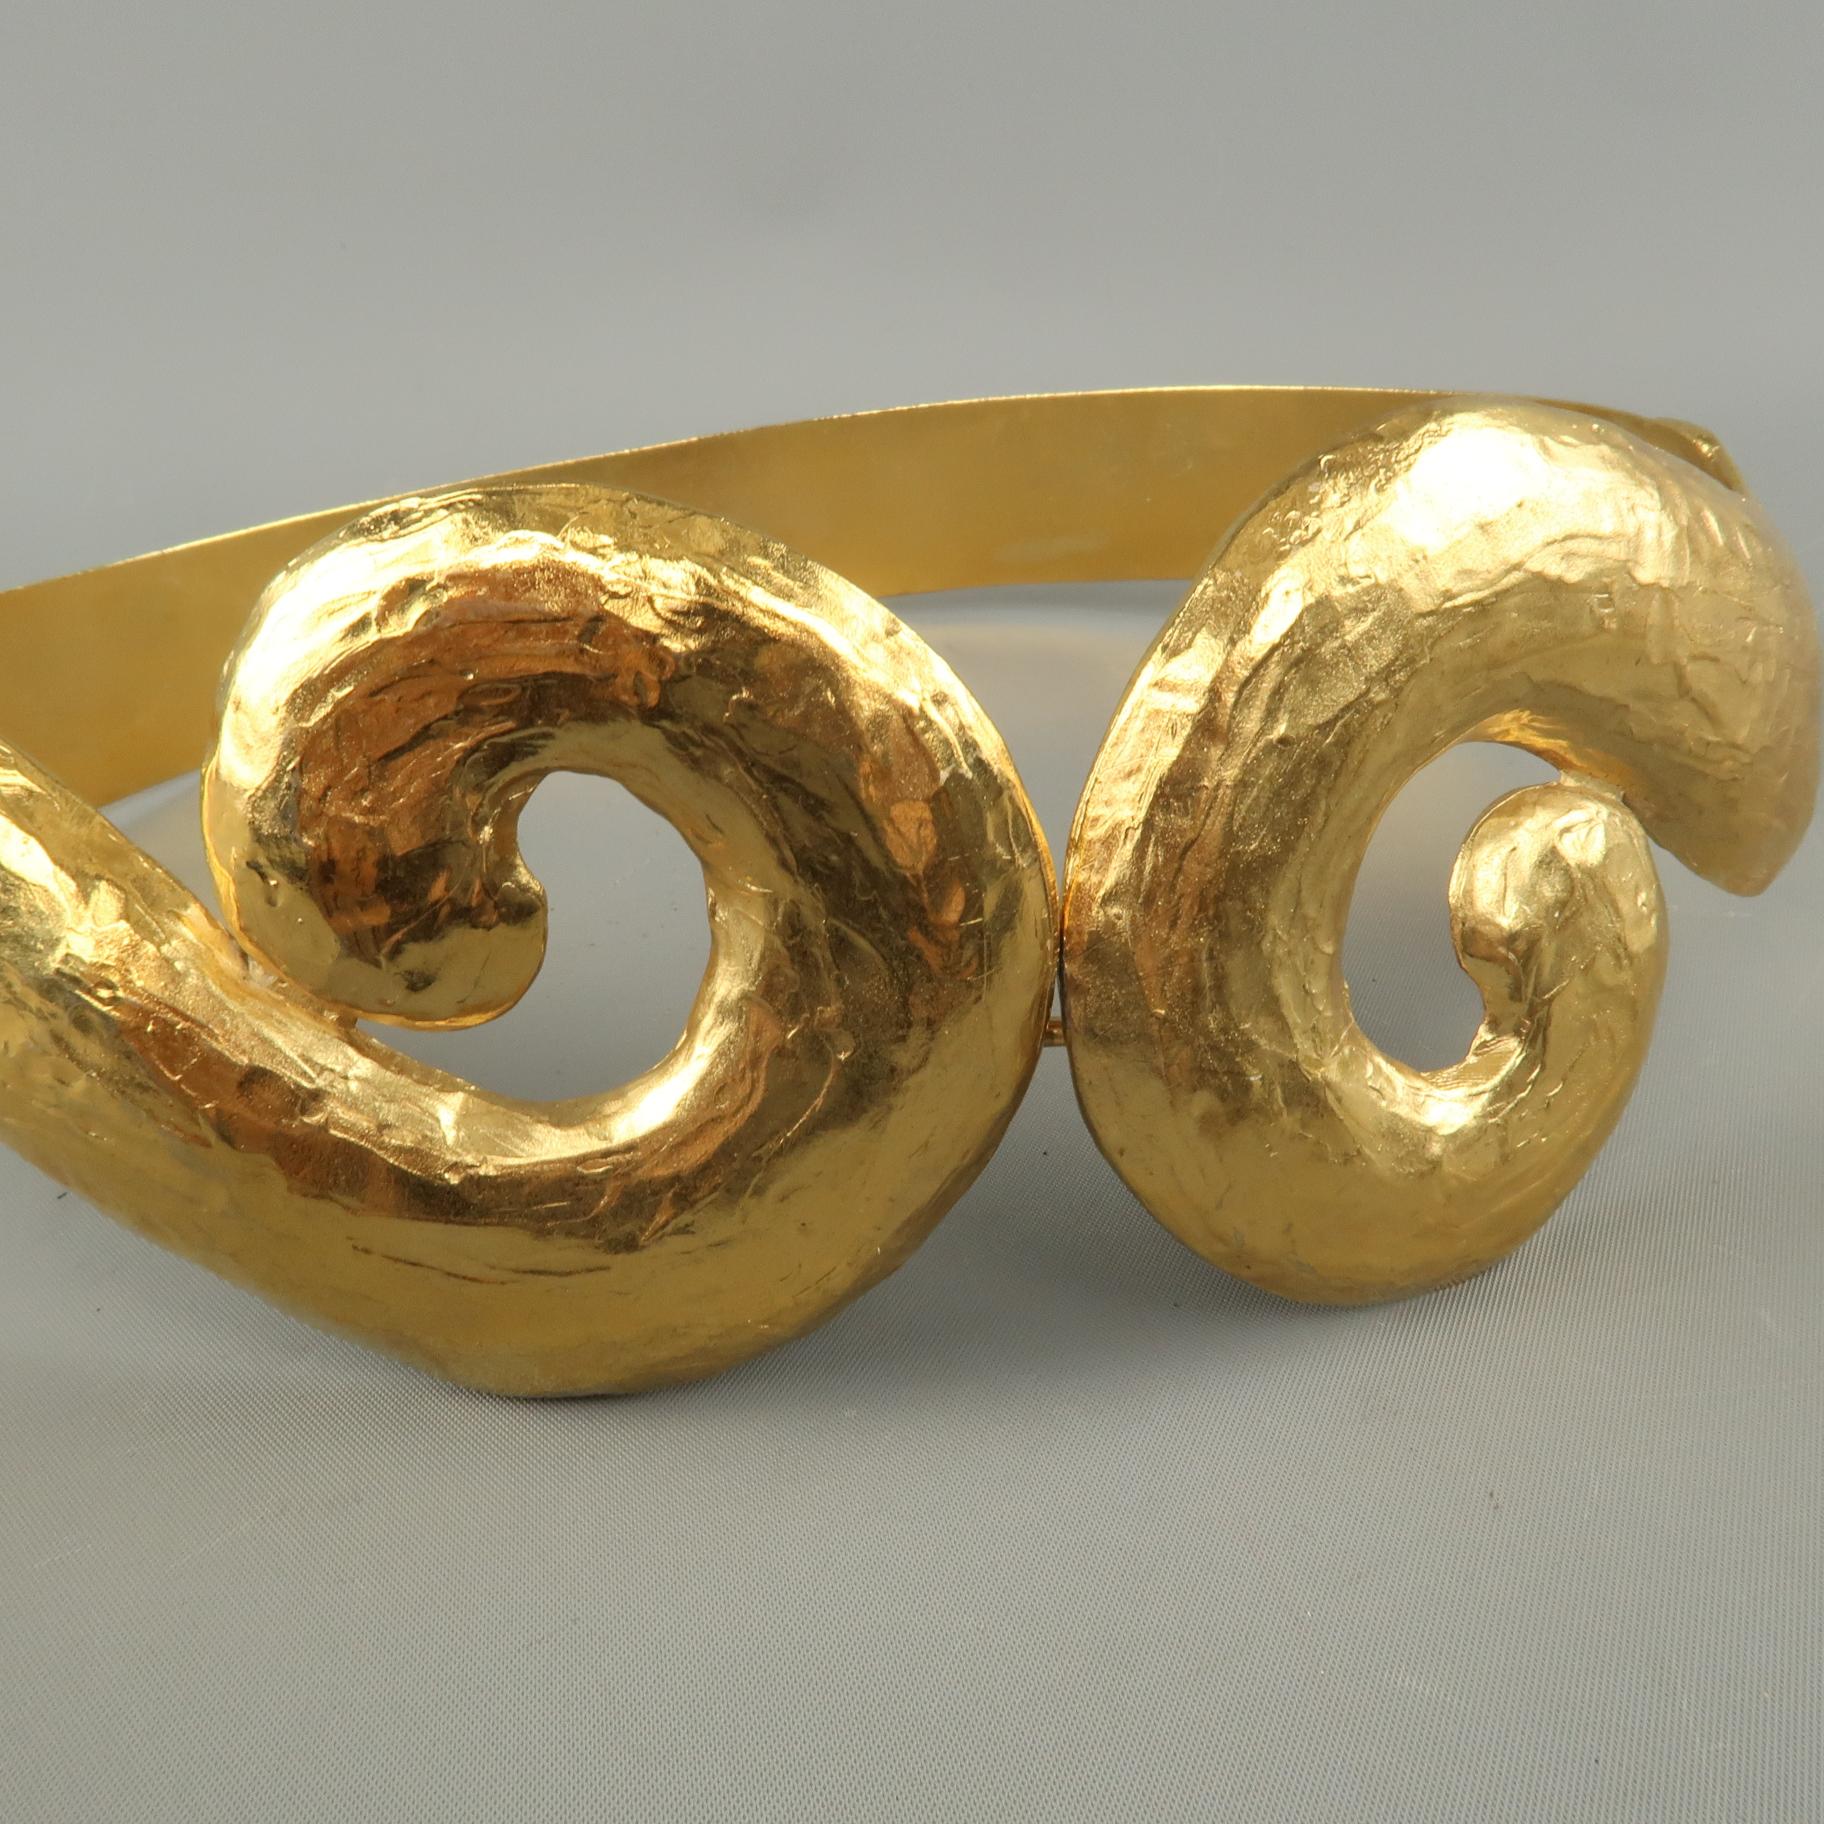 This rare vintage circa 1980's YVES SAINT LAURENT RIVE GAUCHE belt by legendary jewelry designer ROBERT GOOSEENS comes in yellow gold tone hammered rigid metal with a textured band, swirl motif front, and hook eye closure. Made in France.
